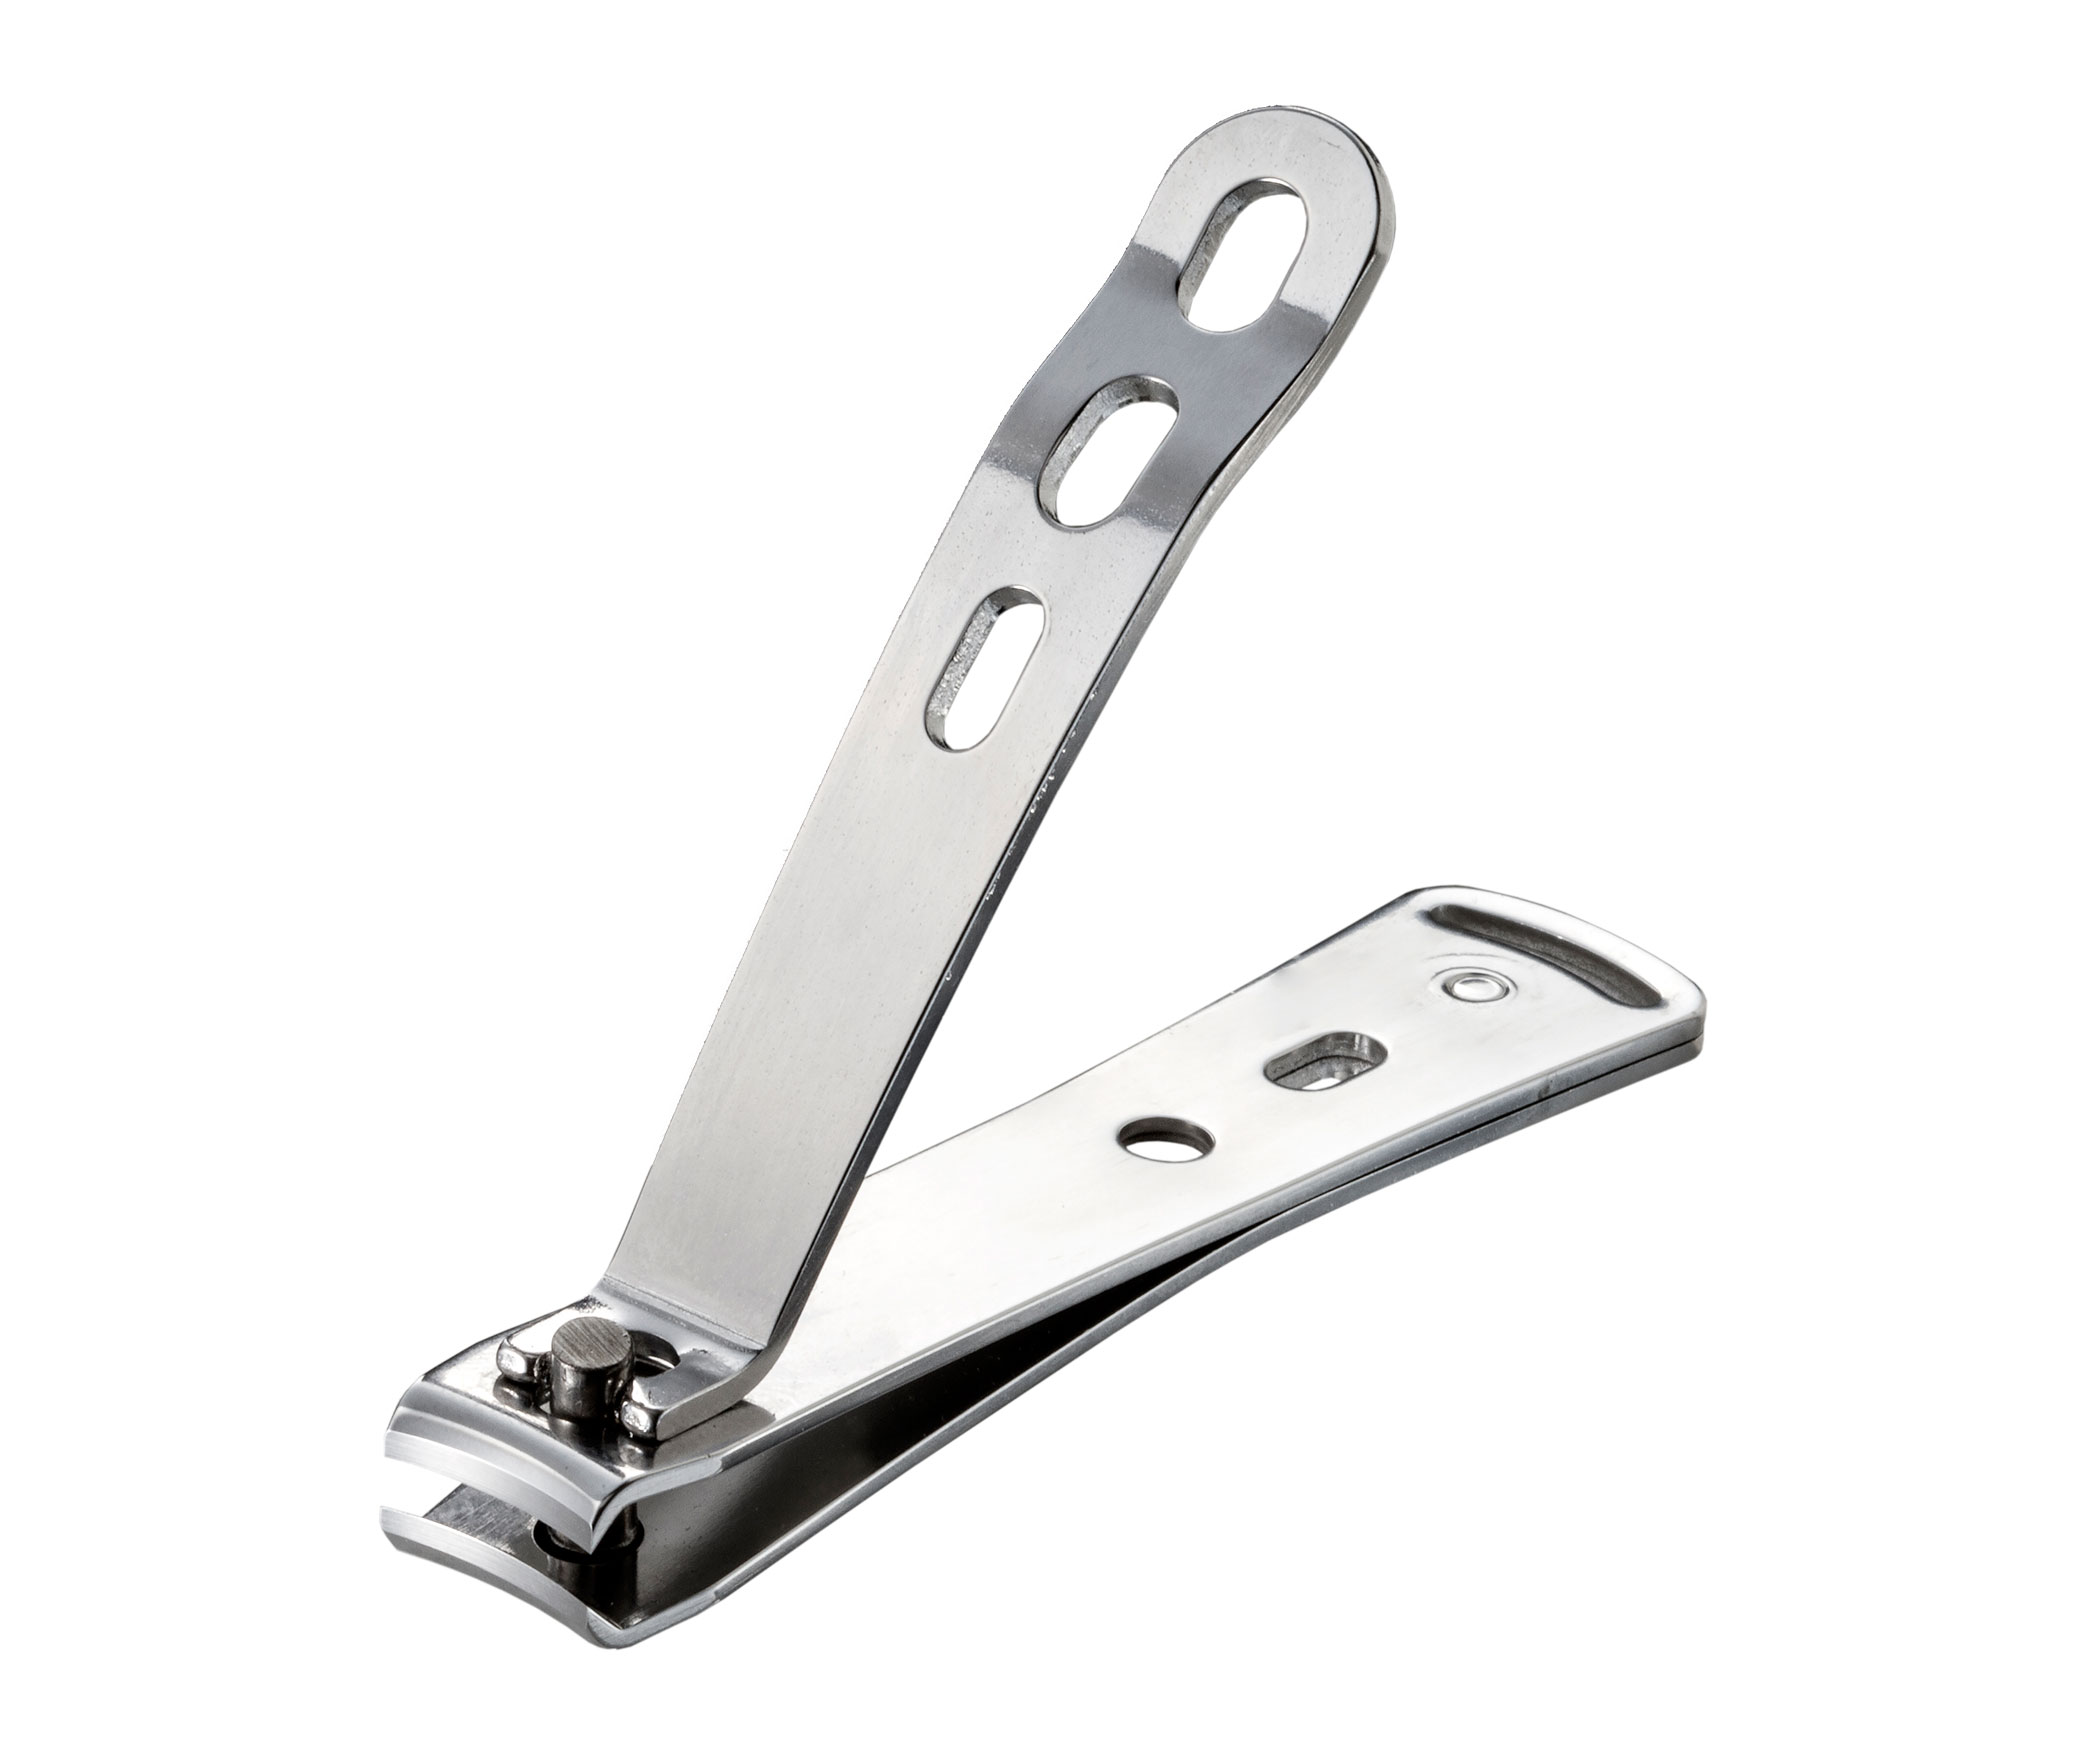 Seki Edge ALL Stainless Steel Nail Clipper (SS-111) medical use